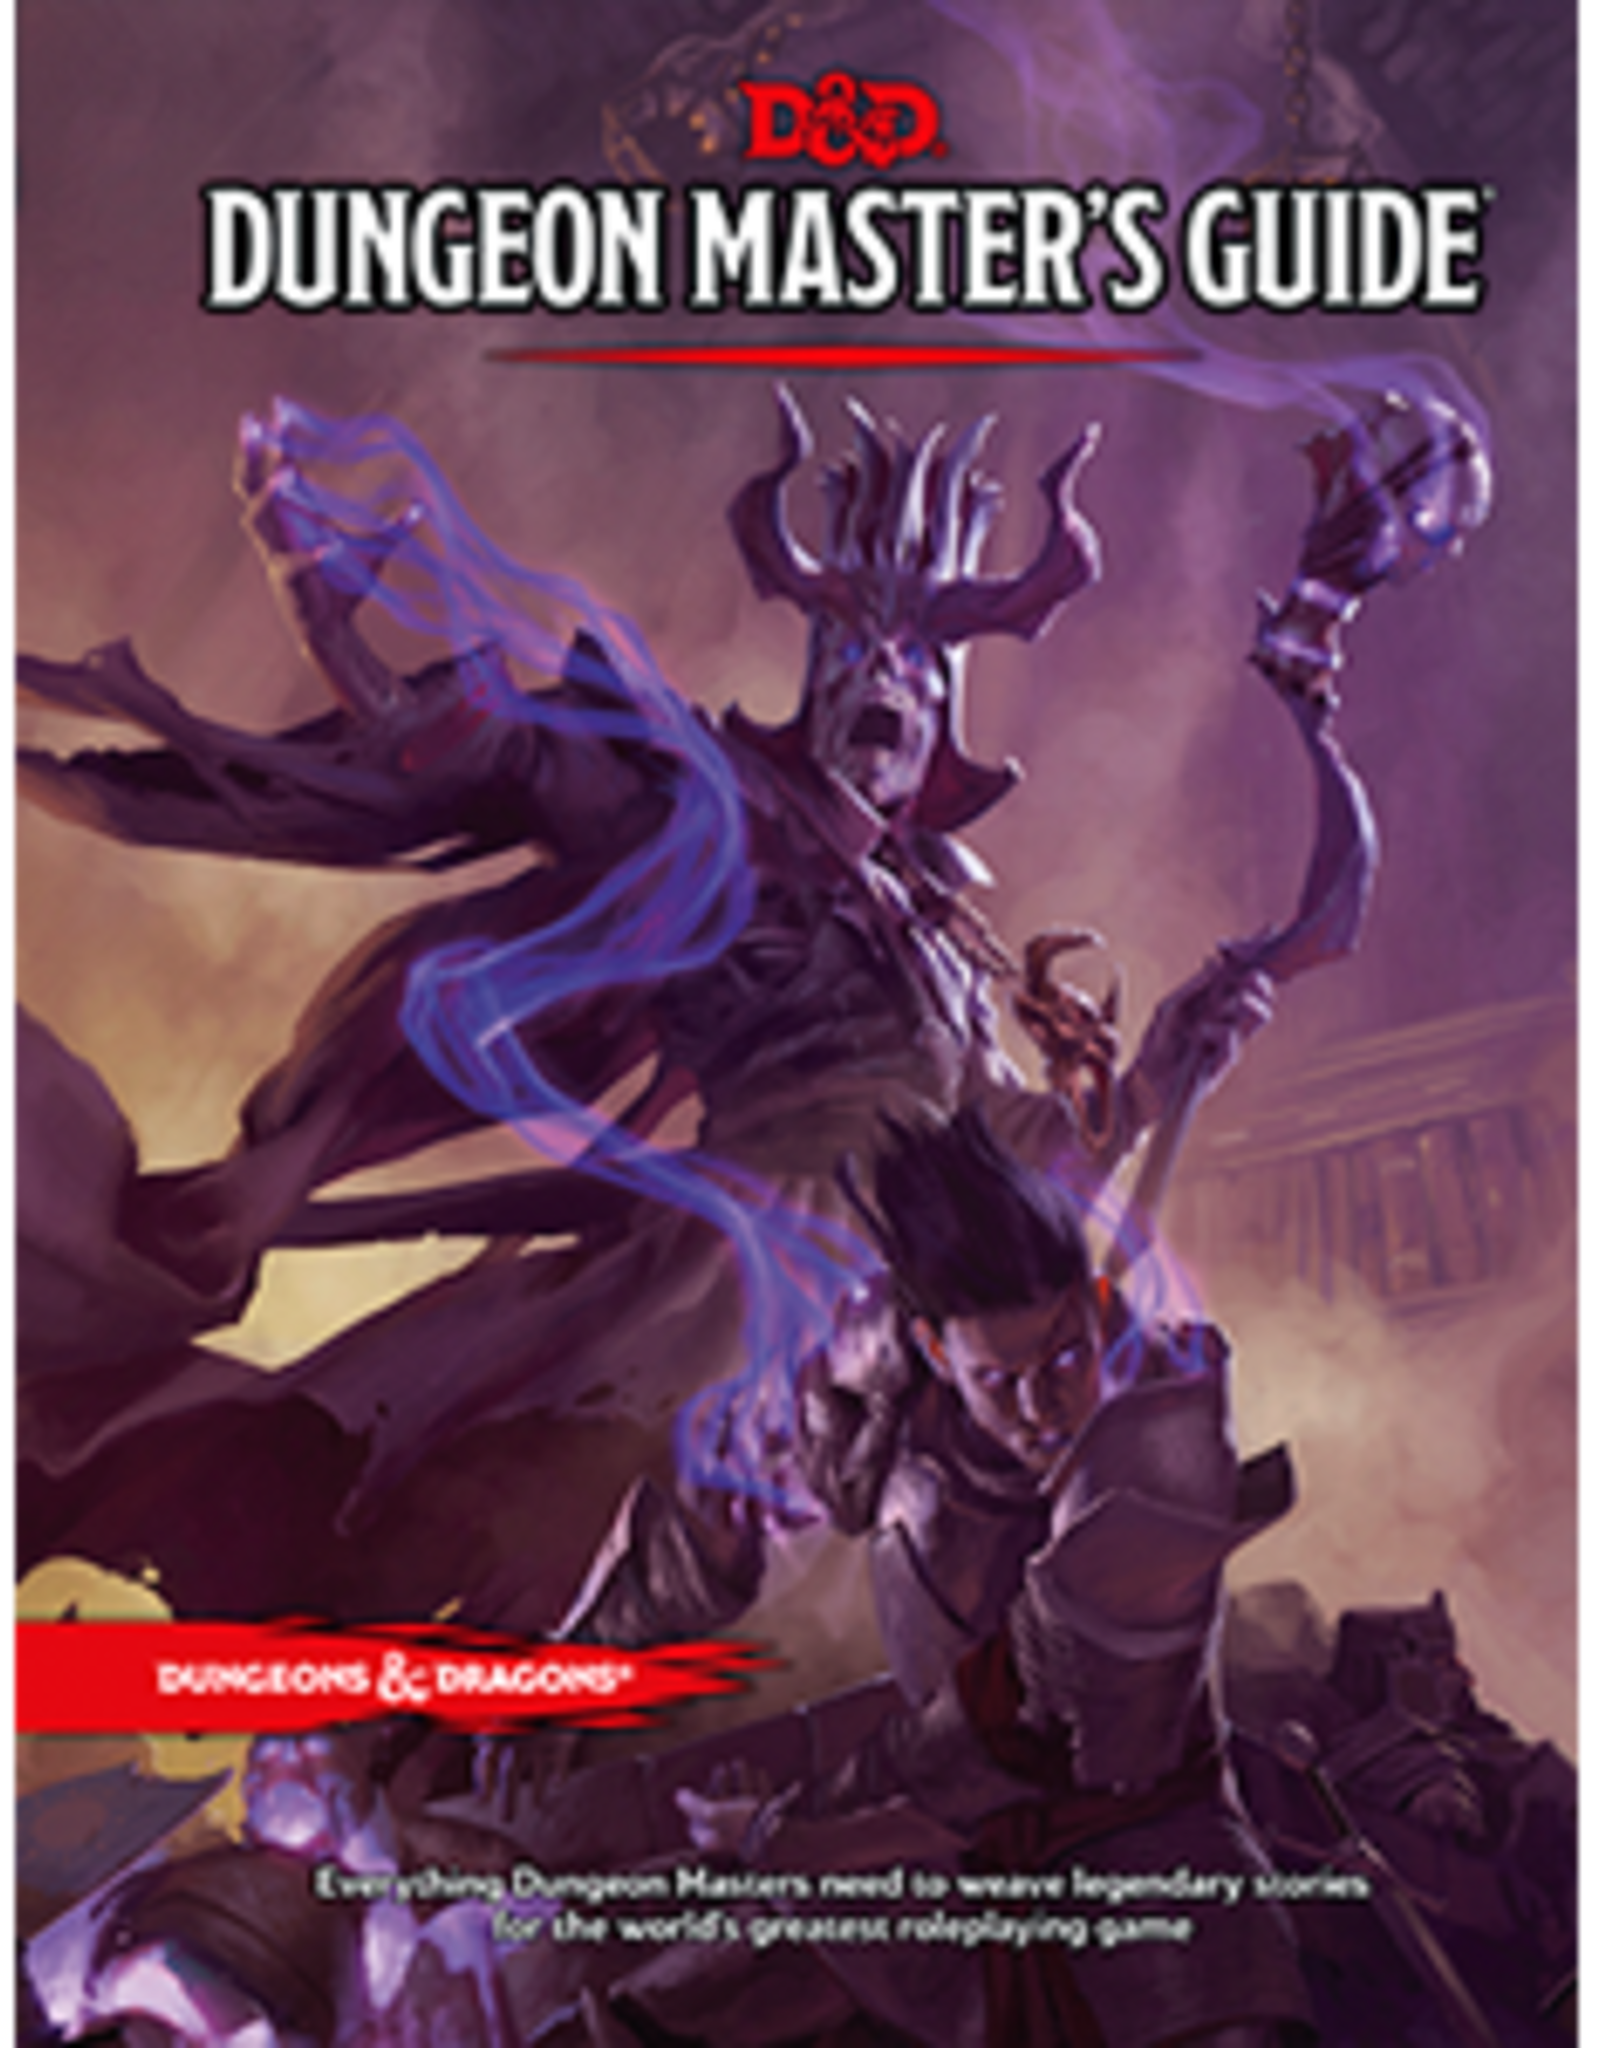 Dungeons & Dragons D&D 5e: Dungeon Master's Guide